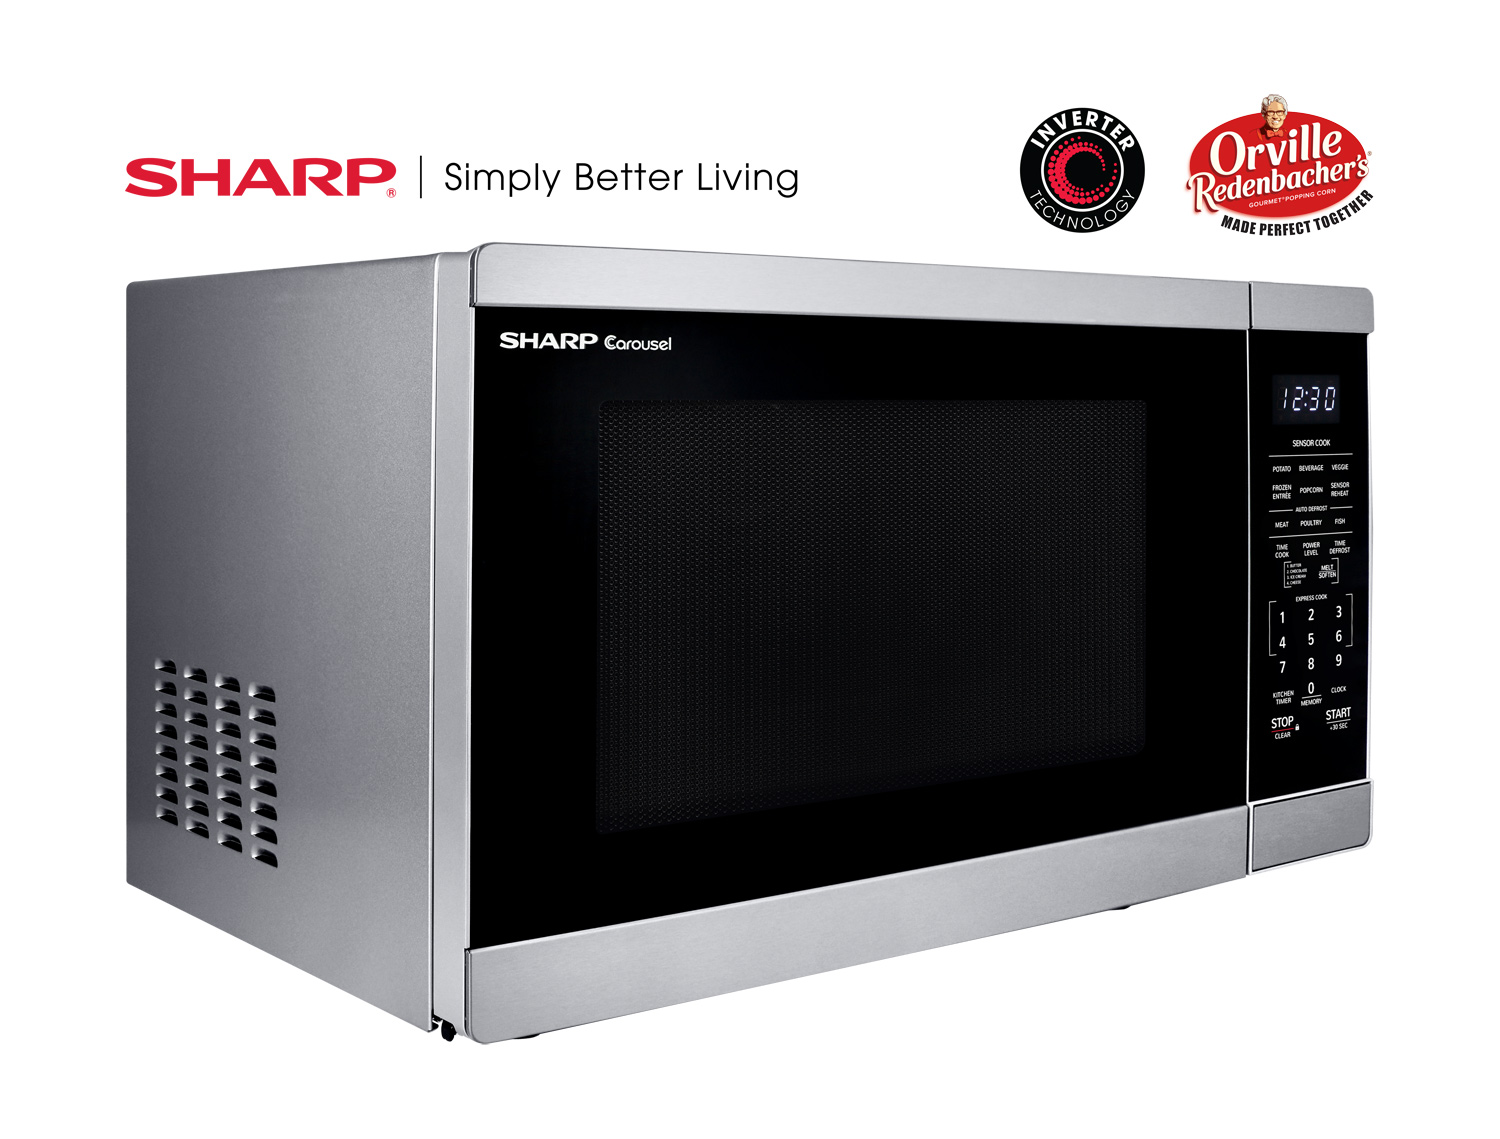 Sharp 1.4 Cu. ft. Stainless Steel Countertop Microwave Oven with Inverter Technology